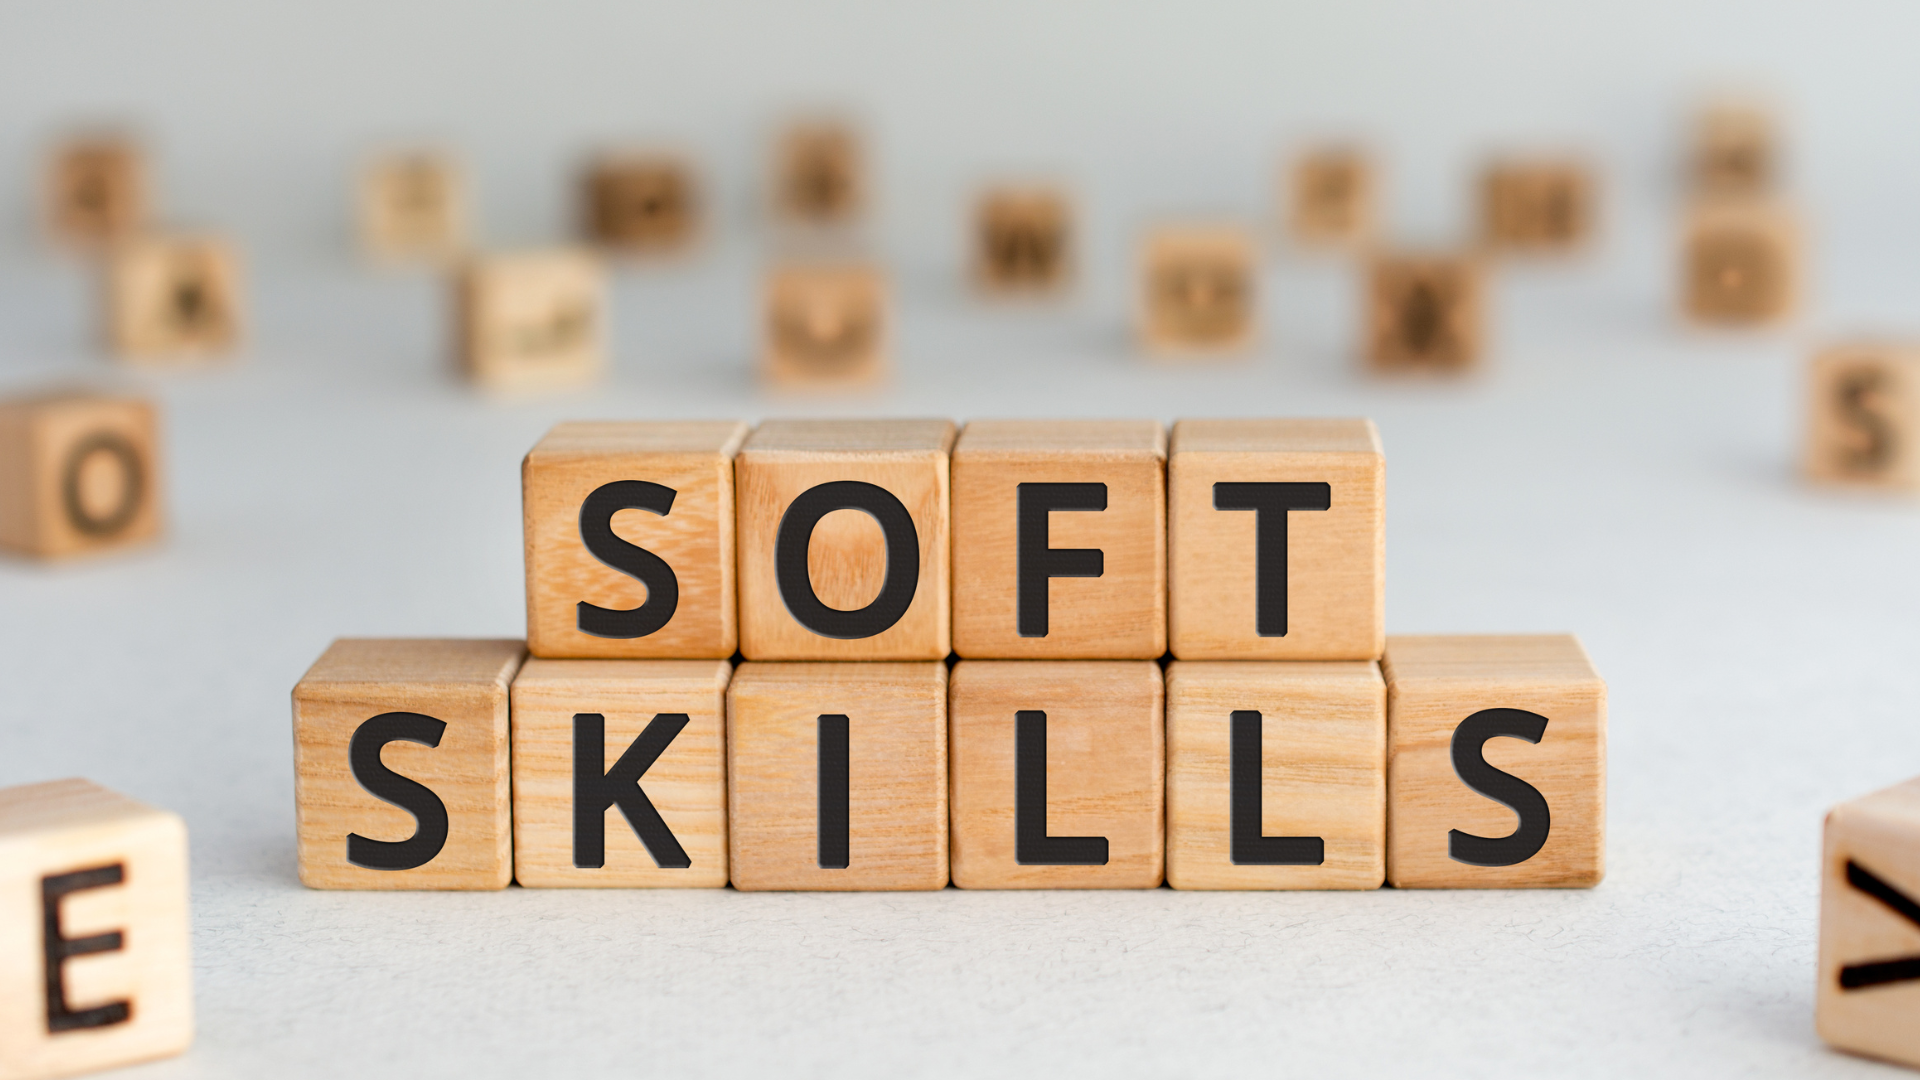 Top 10 soft skills employees should develop